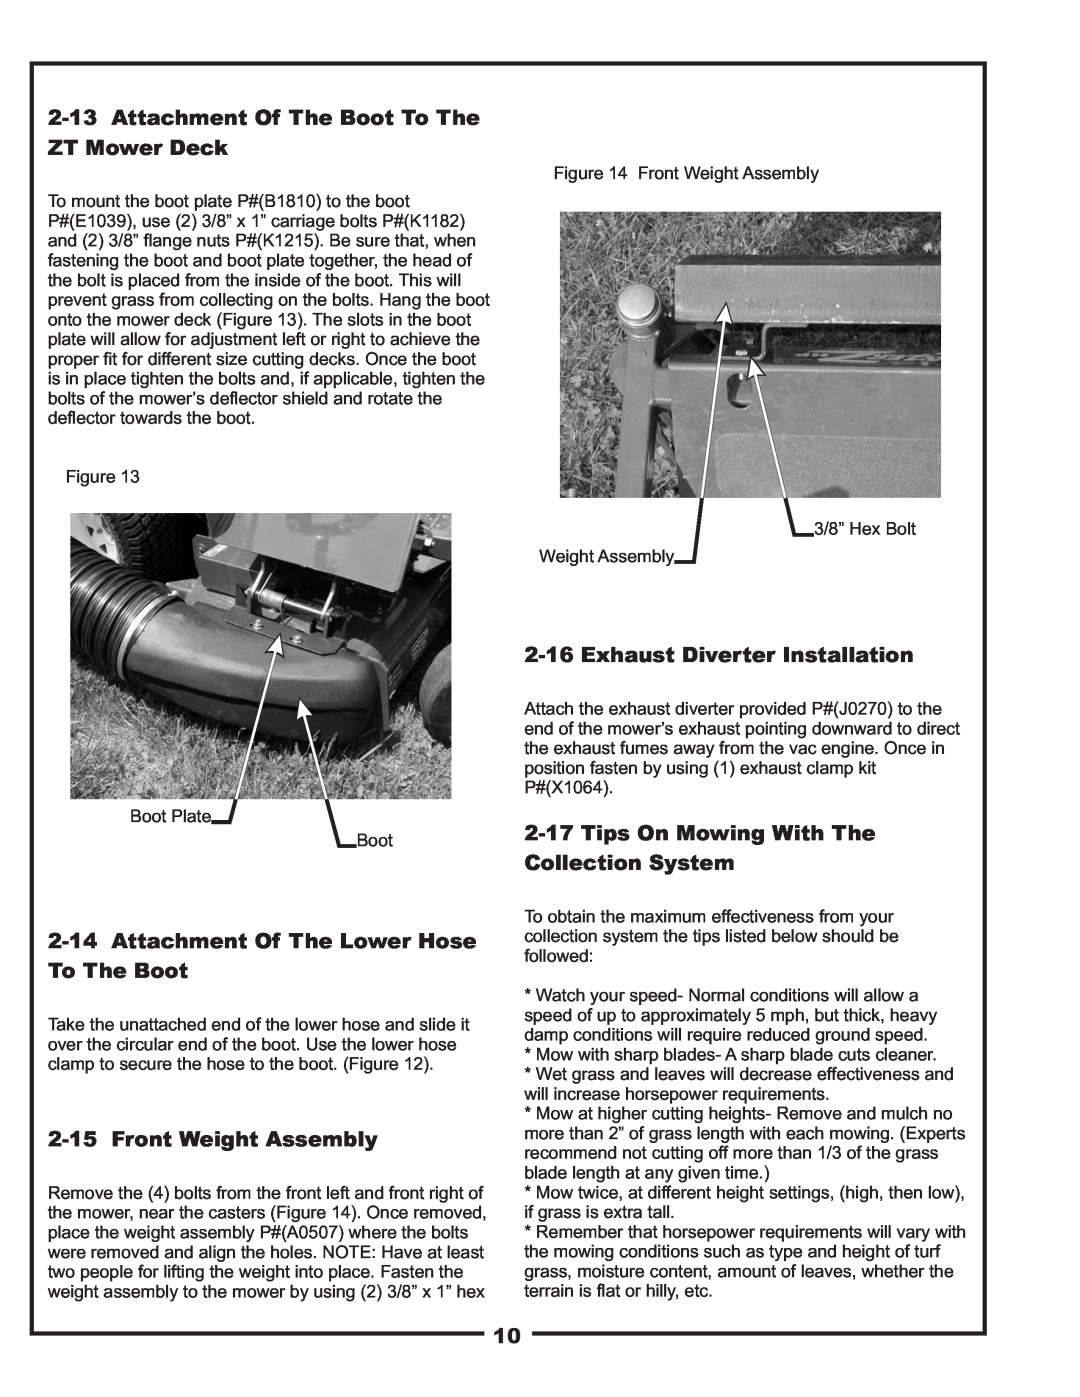 Toro 22621223-24 manual Attachment Of The Boot To The ZT Mower Deck, Attachment Of The Lower Hose To The Boot 